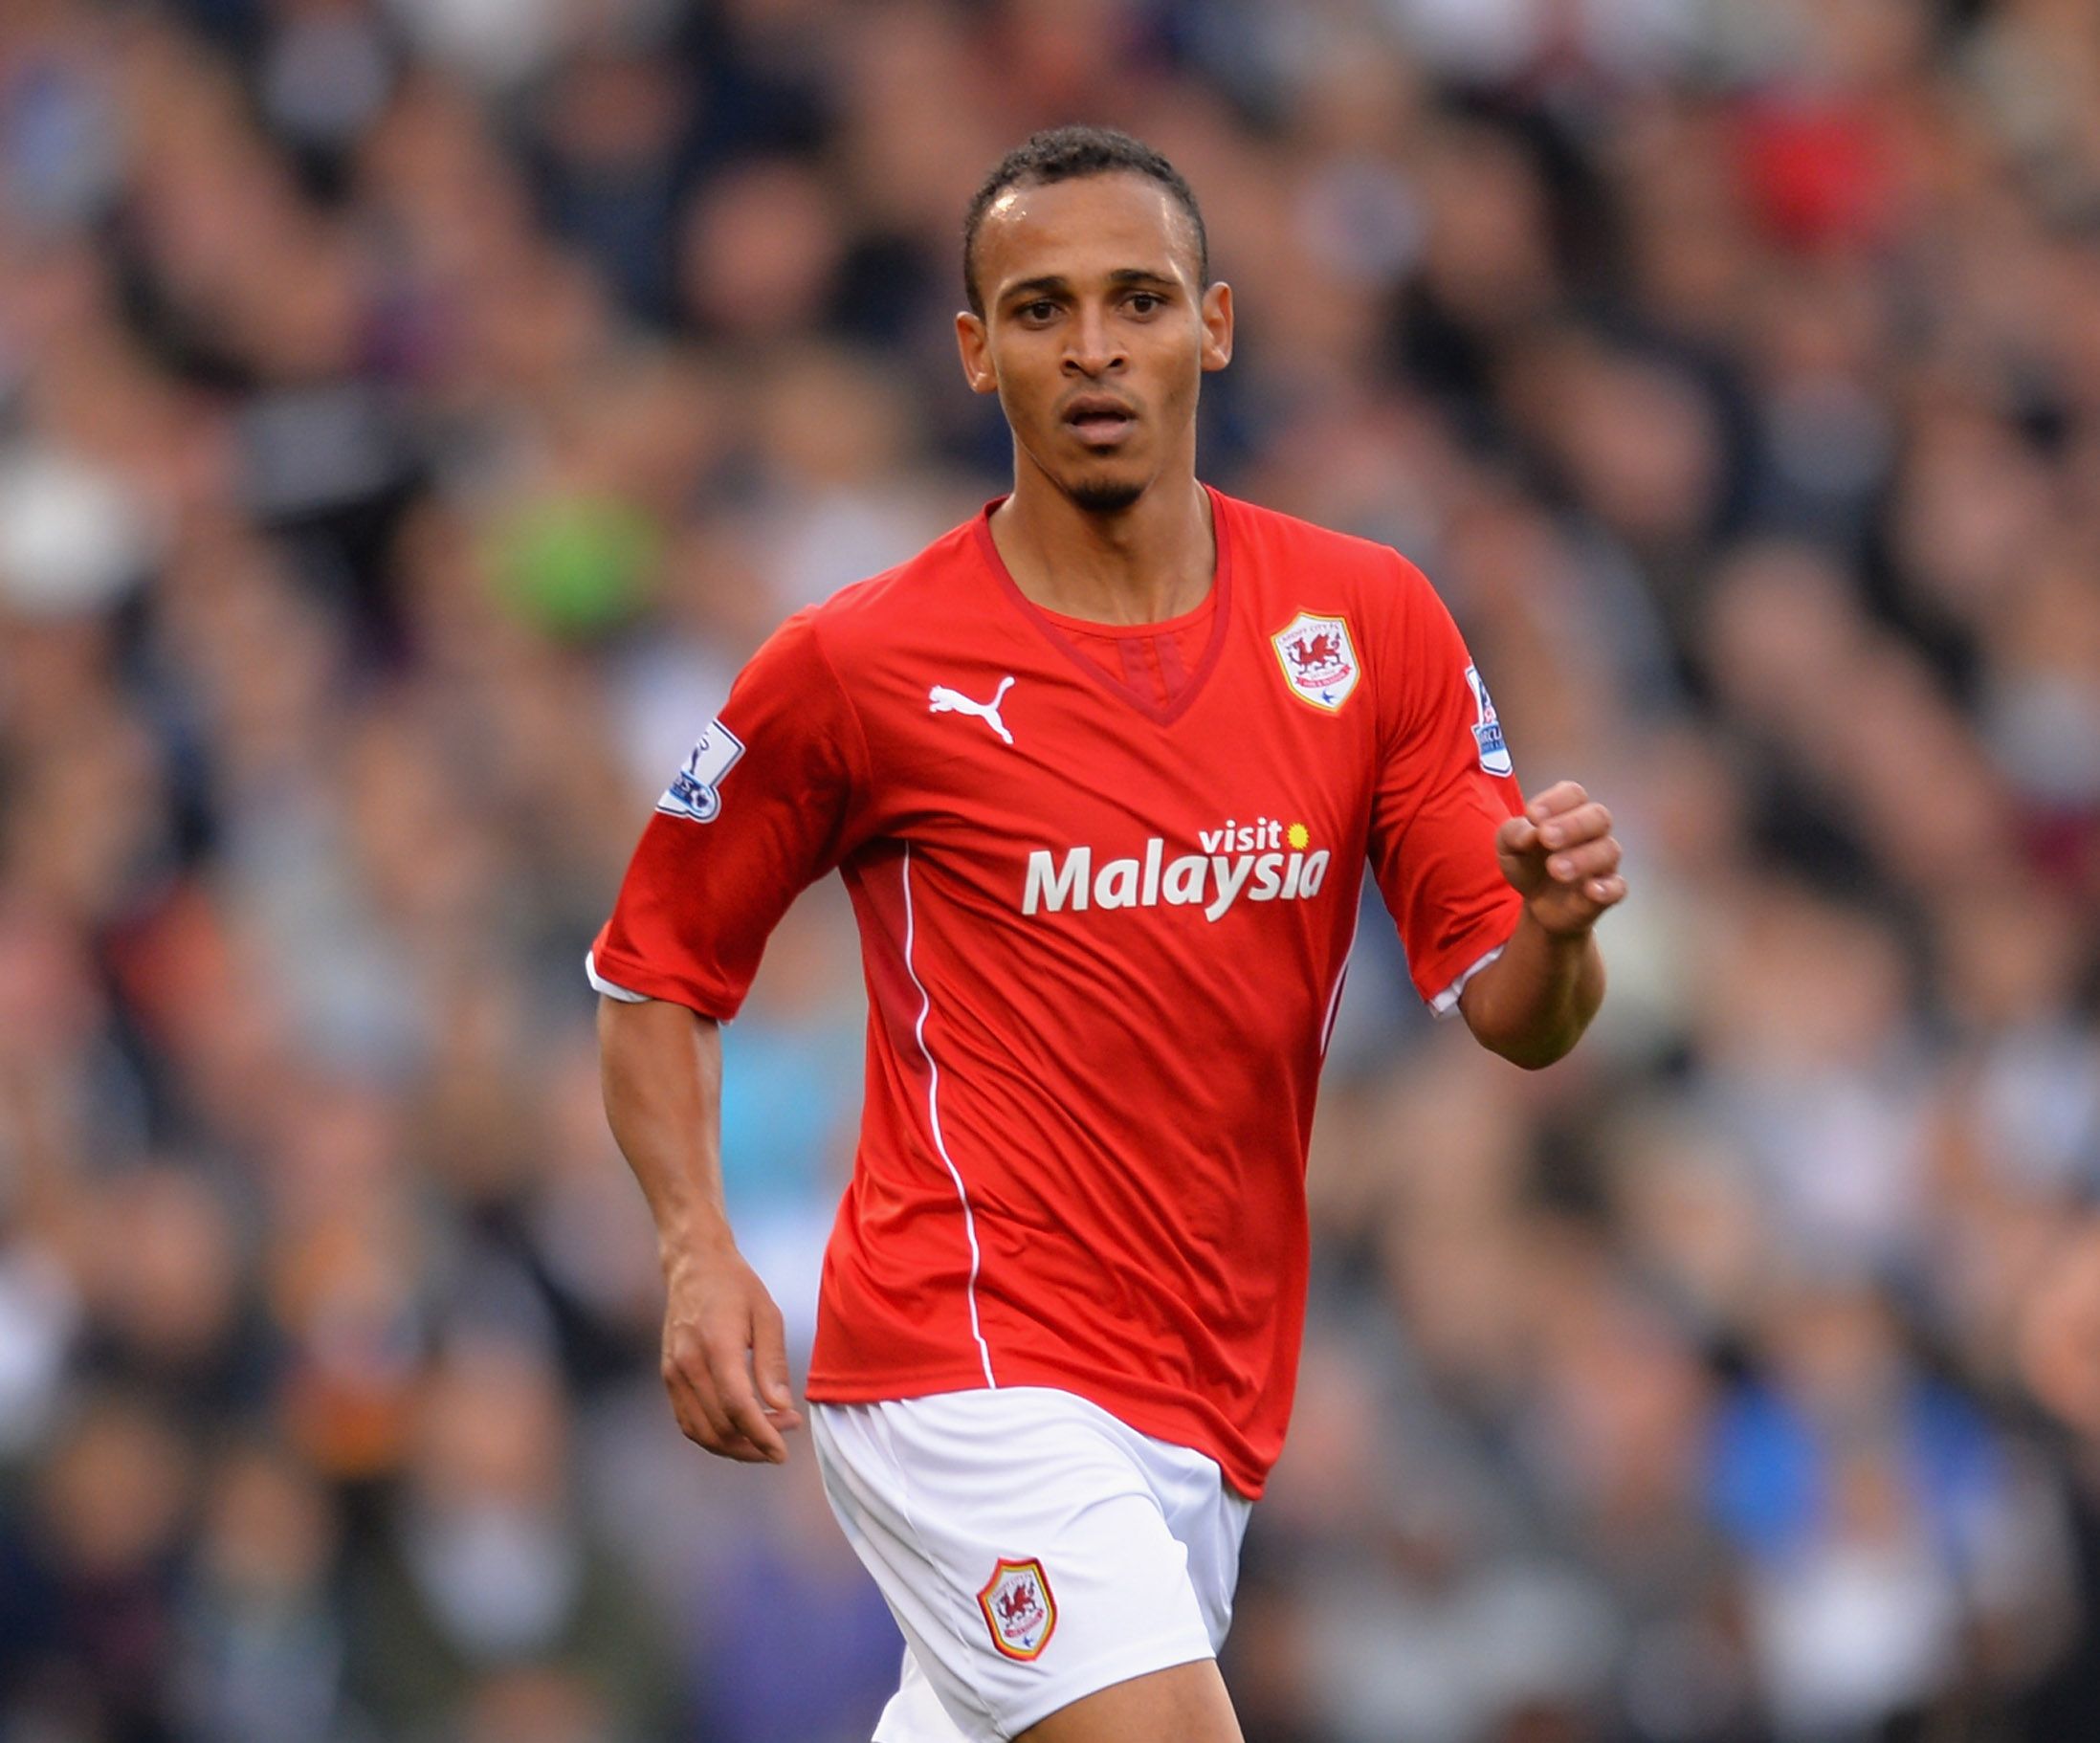 Osaze Odemwingie played for three Premier League clubs including Cardiff City